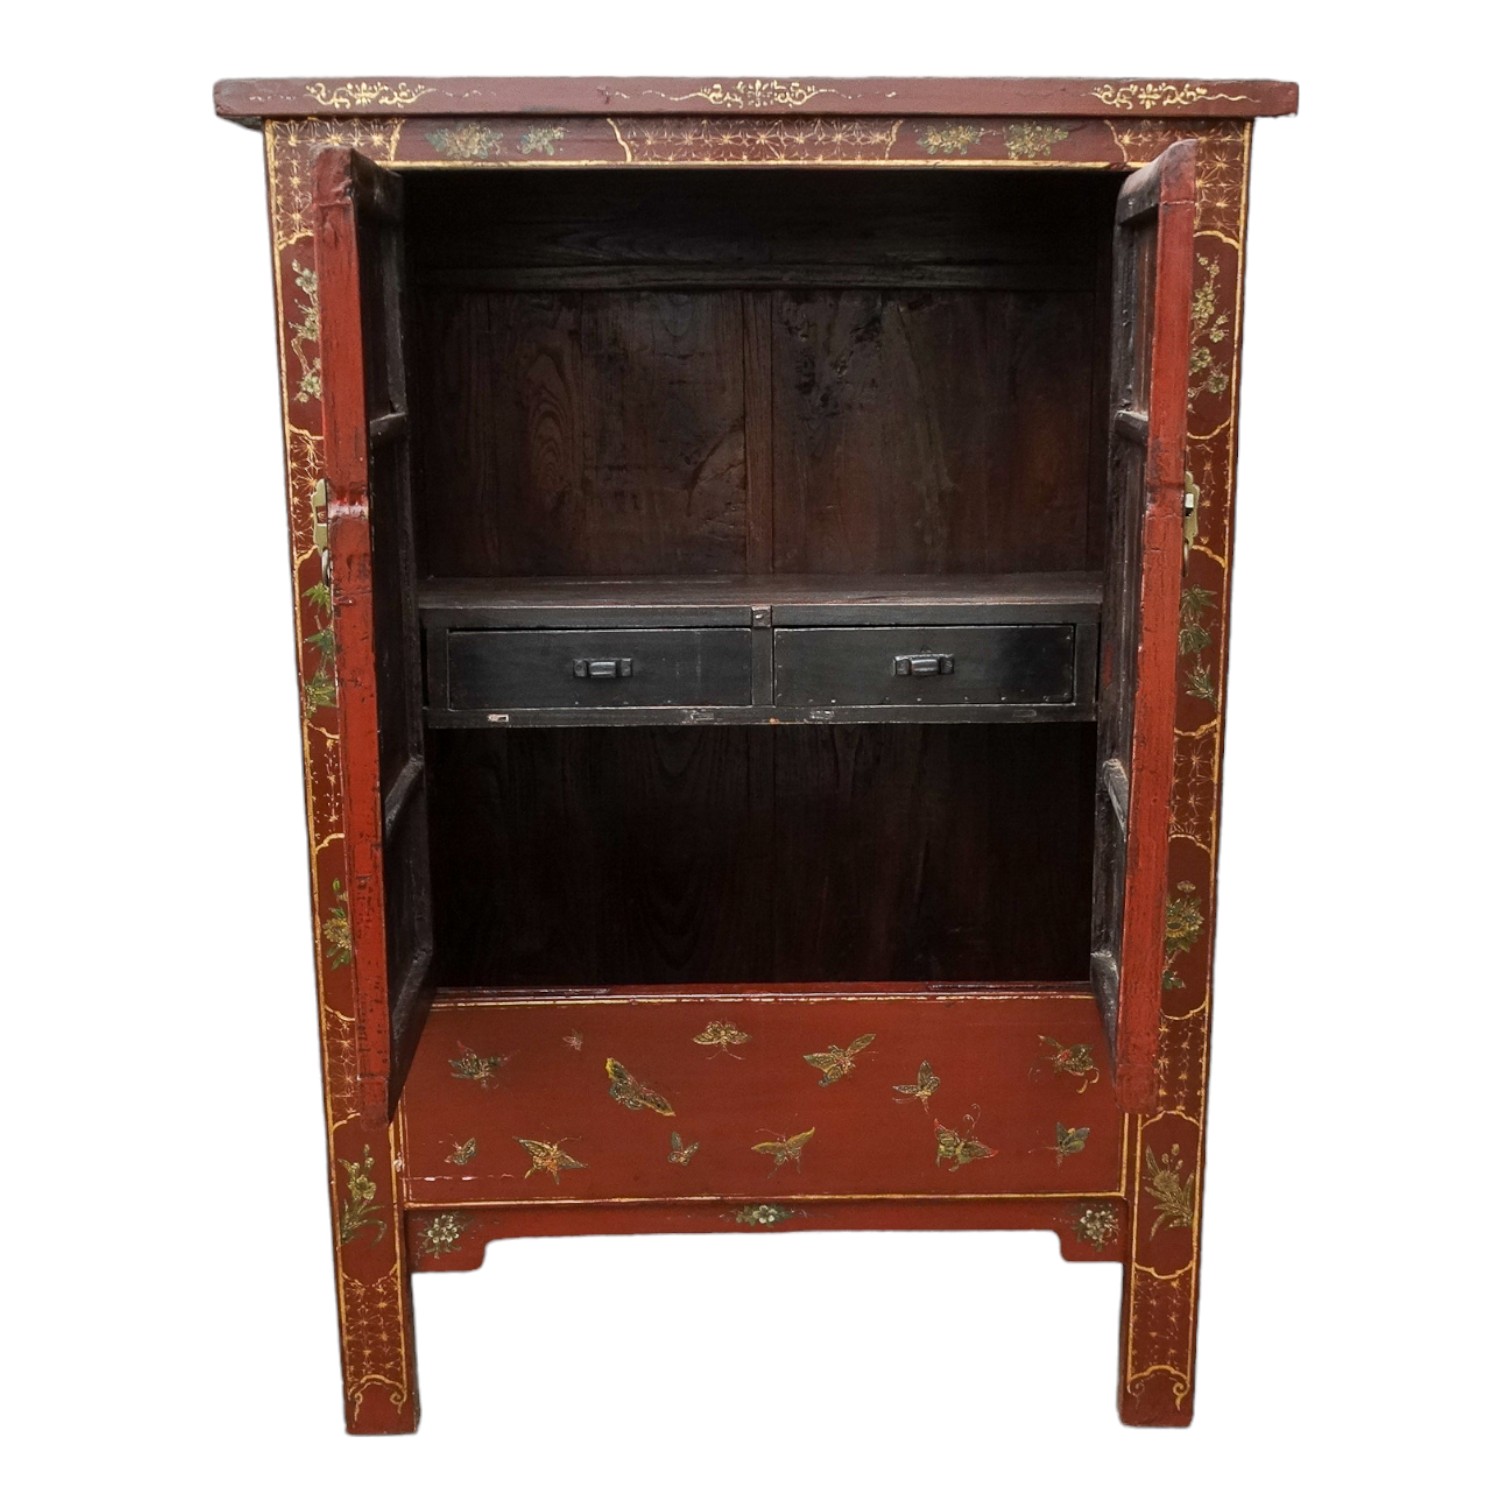 A 19th century Chinese lacquered cabinet - decorated with butterflies and cherry blossom, the pair - Image 7 of 7